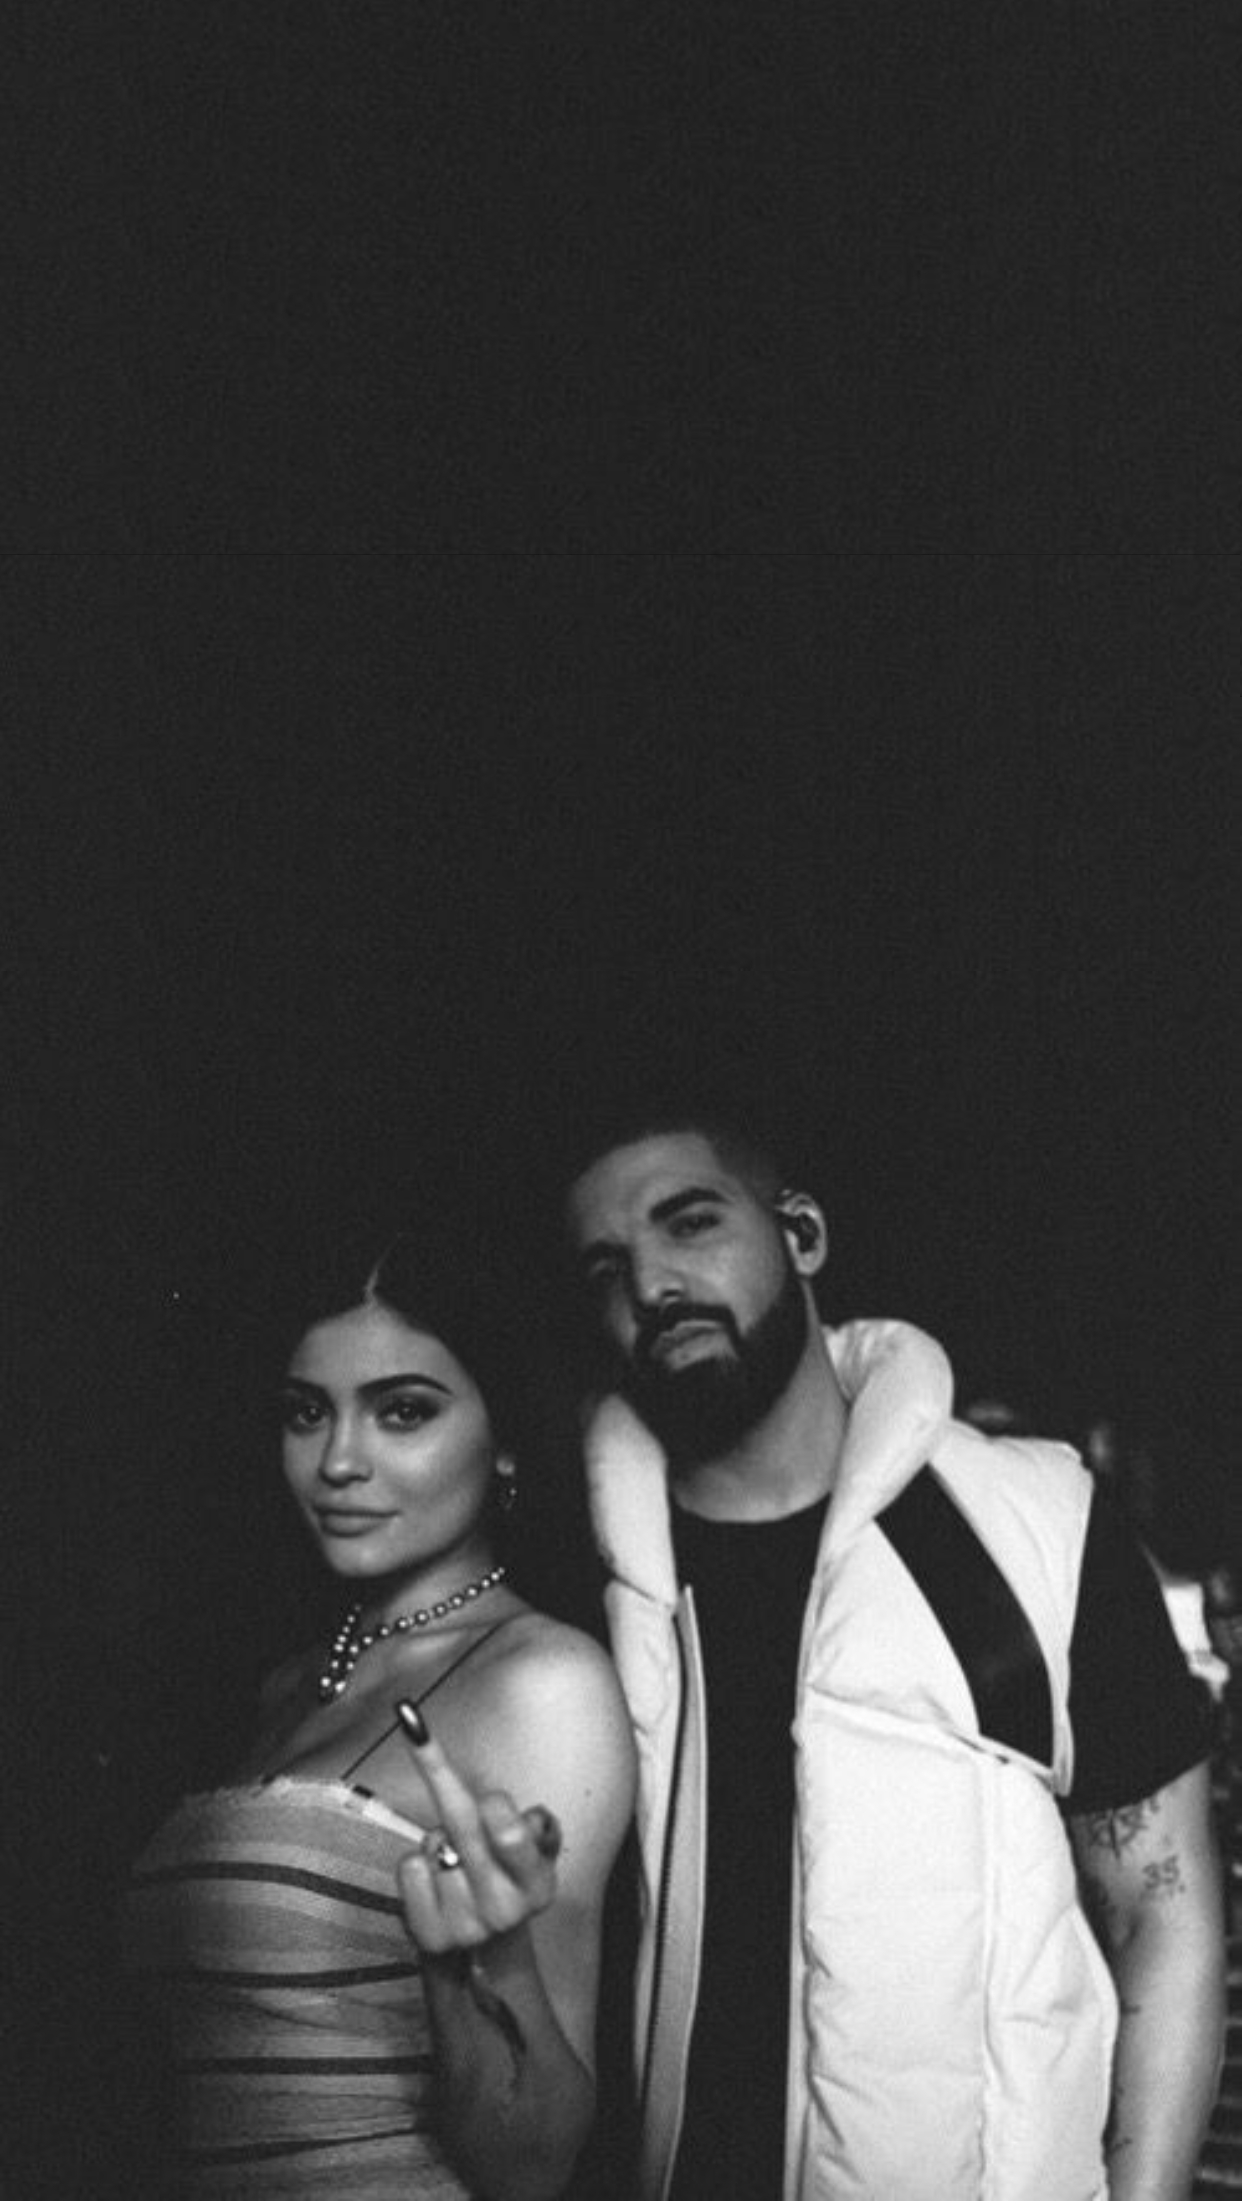 Kylie Jenner and Drake wallpaper. Untitled 02 in 2019